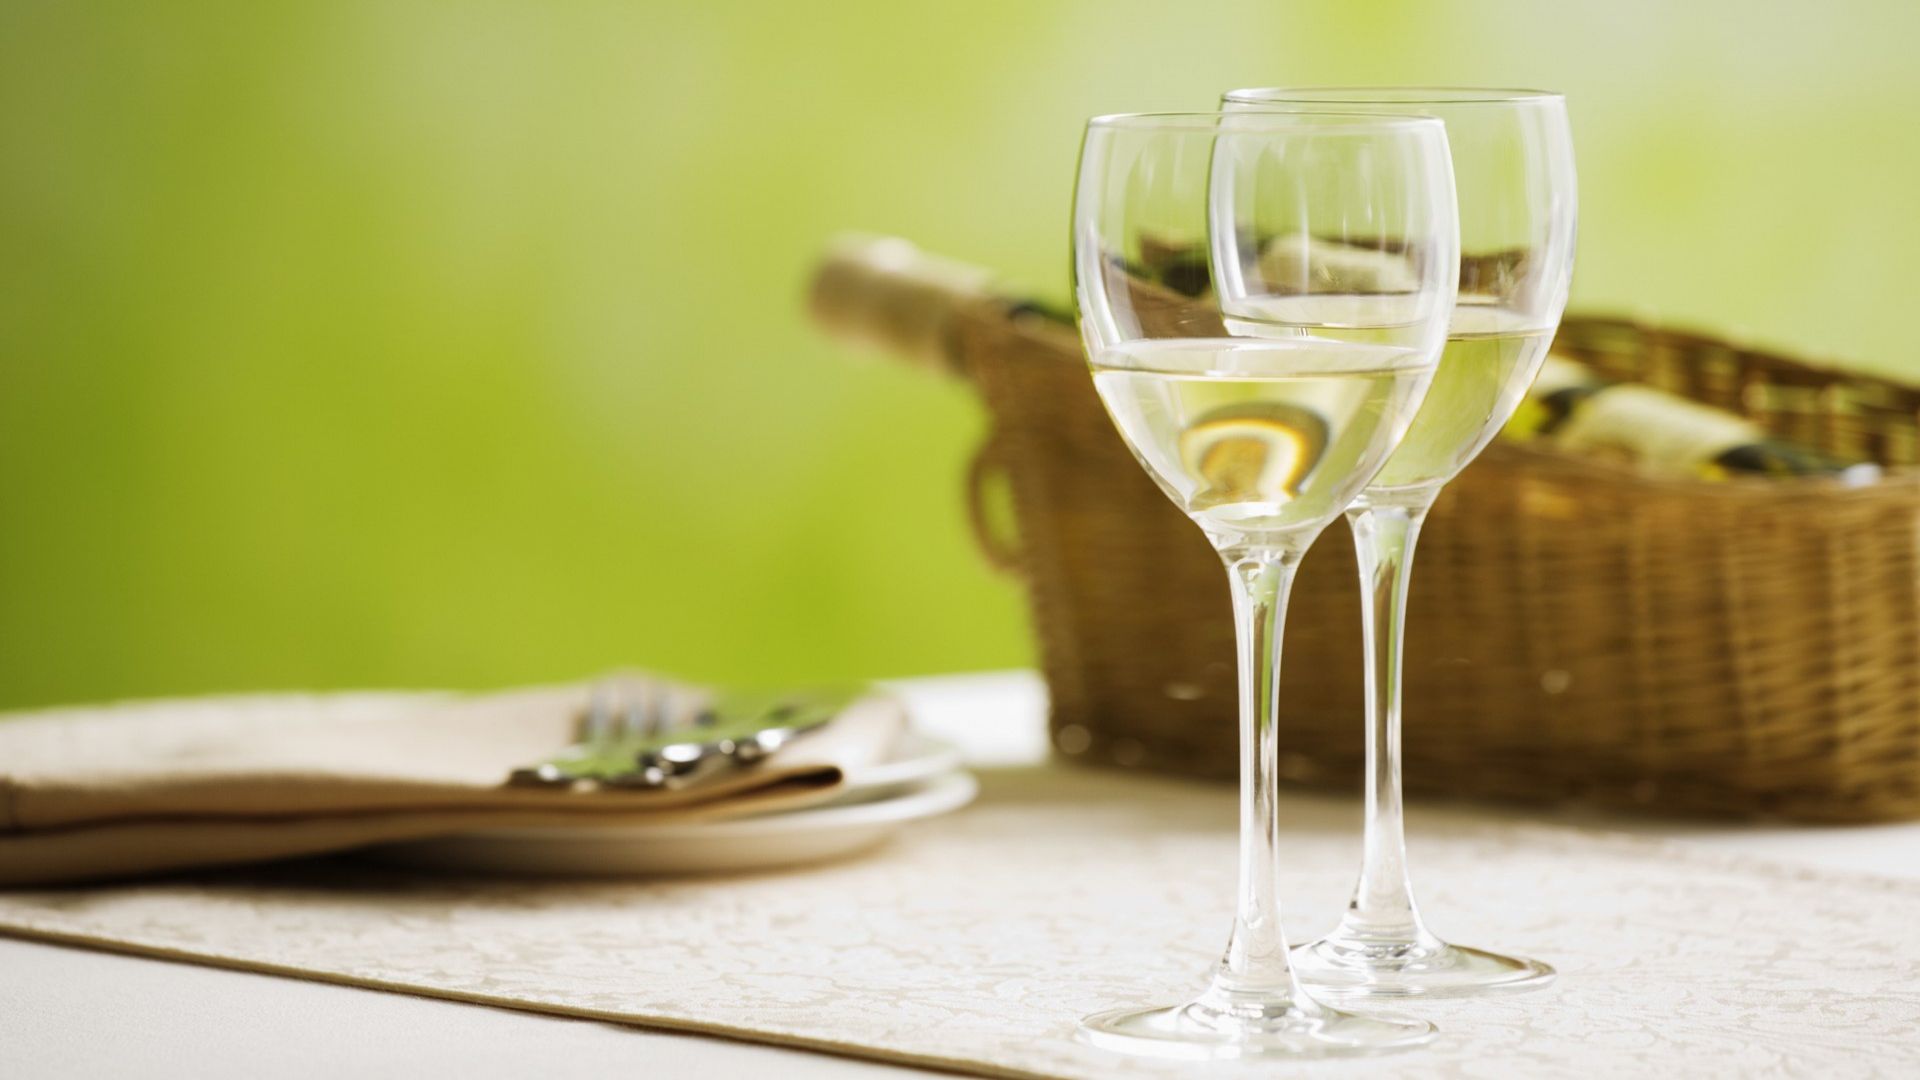 Change up the Sauvignon sipping with some Chardonnay this summer photo